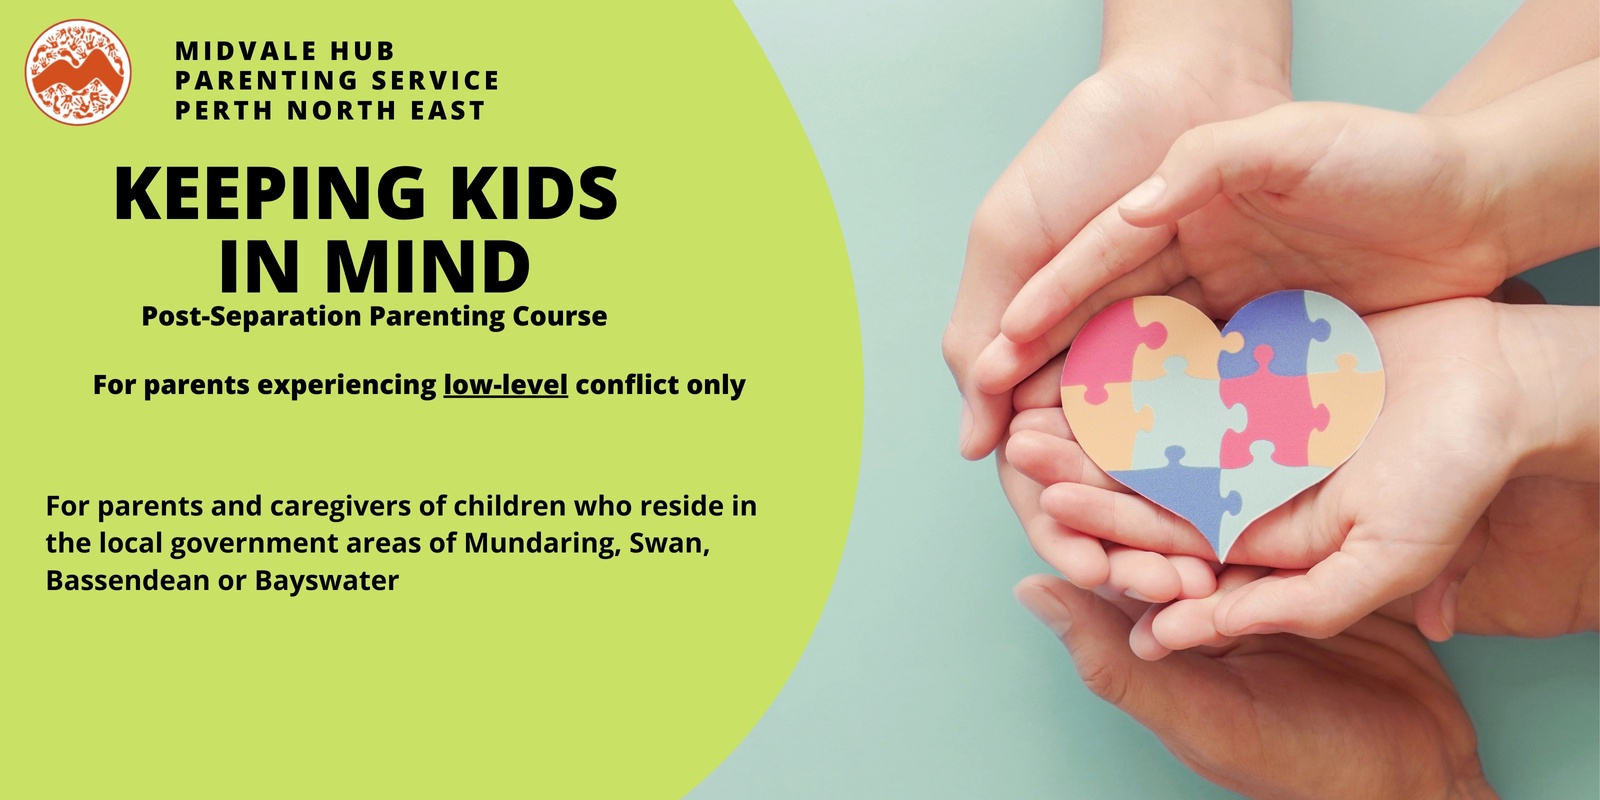 Banner image for KEEPING KIDS IN MIND - POST-SEPARATION PARENTING COURSE - MIDVALE